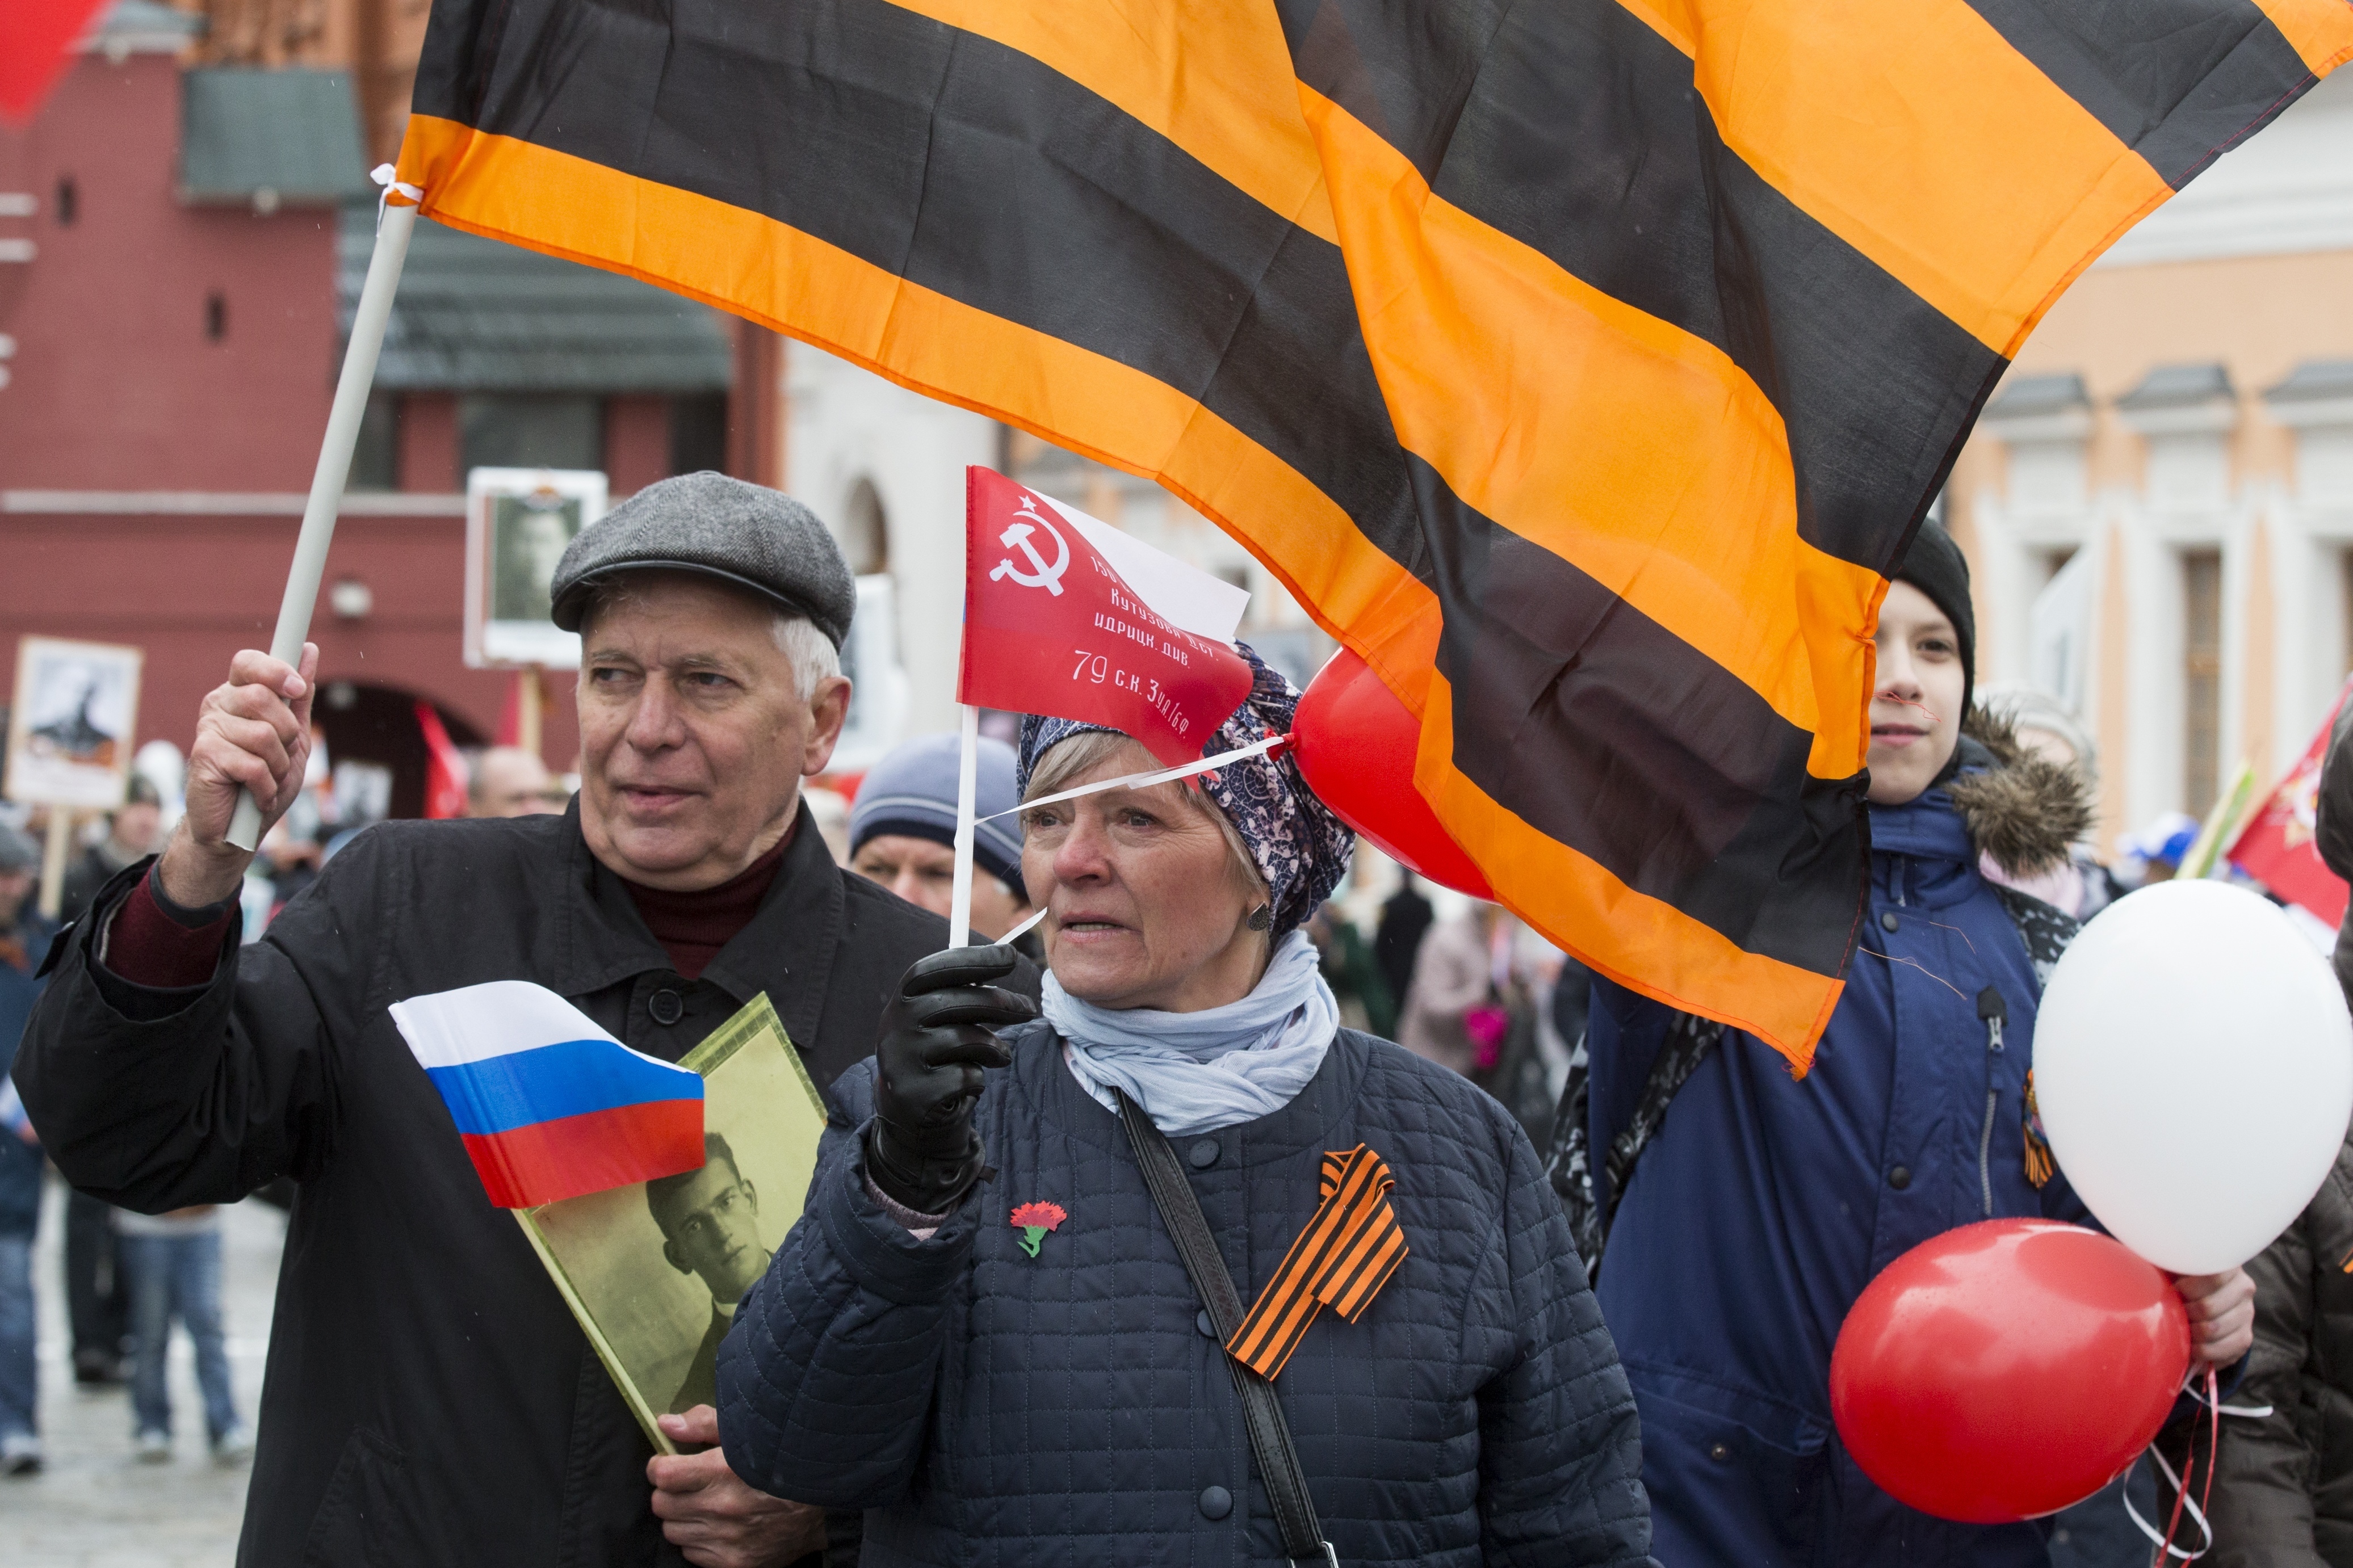 People carry portraits of relatives who fought in World War II, and Russian and Soviet flags, during the Immortal Regiment march along the Red Square in Moscow, Russia, Tuesday, May 9, 2017, celebrating 72 years since the end of WWII and the defeat of Nazi Germany. (AP Photo/Alexander Zemlianichenko)